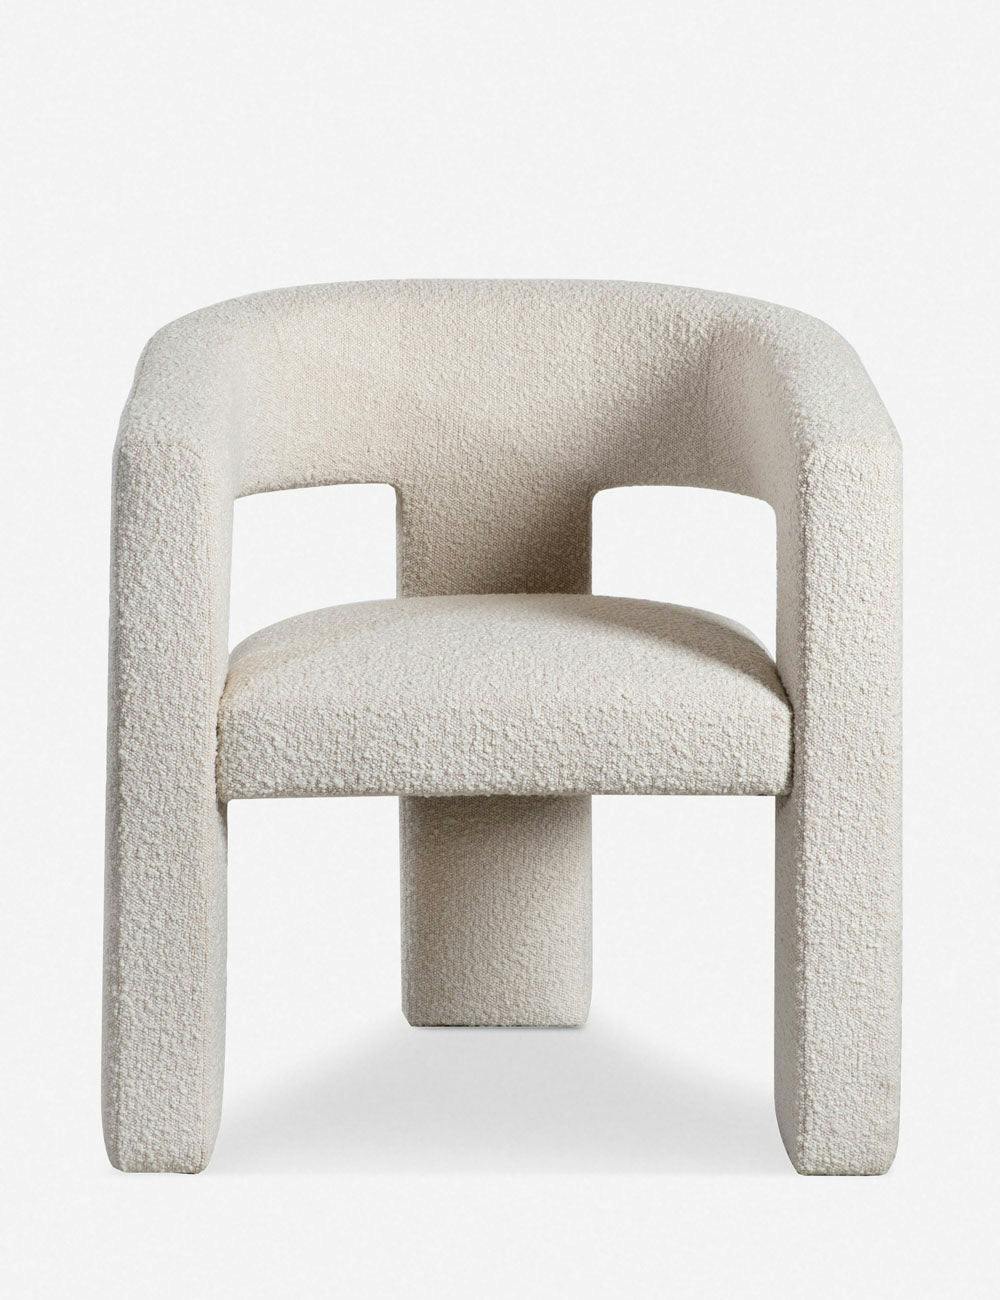 Elo Modern White Barrel Accent Chair with Sculptural Frame